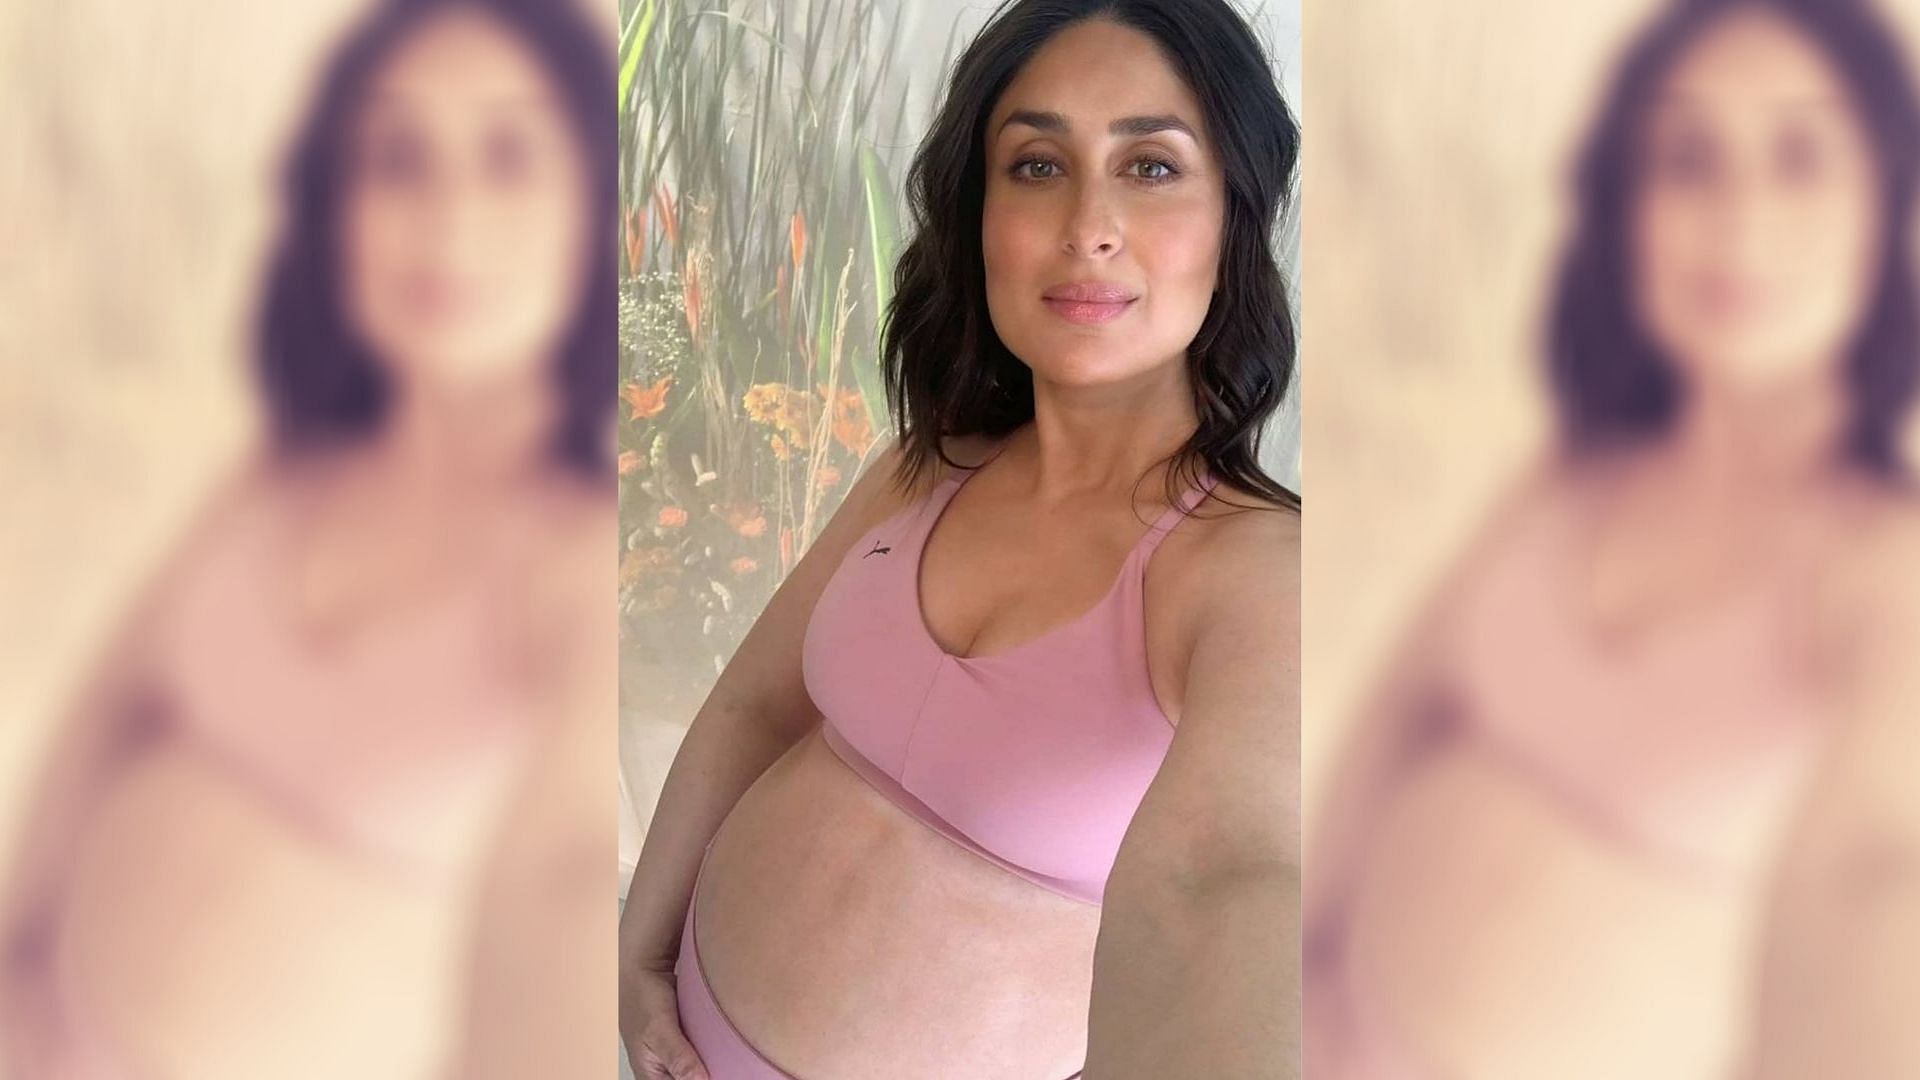 Mom-to-be Kareena Kapoor takes a selfie during a photo shoot.